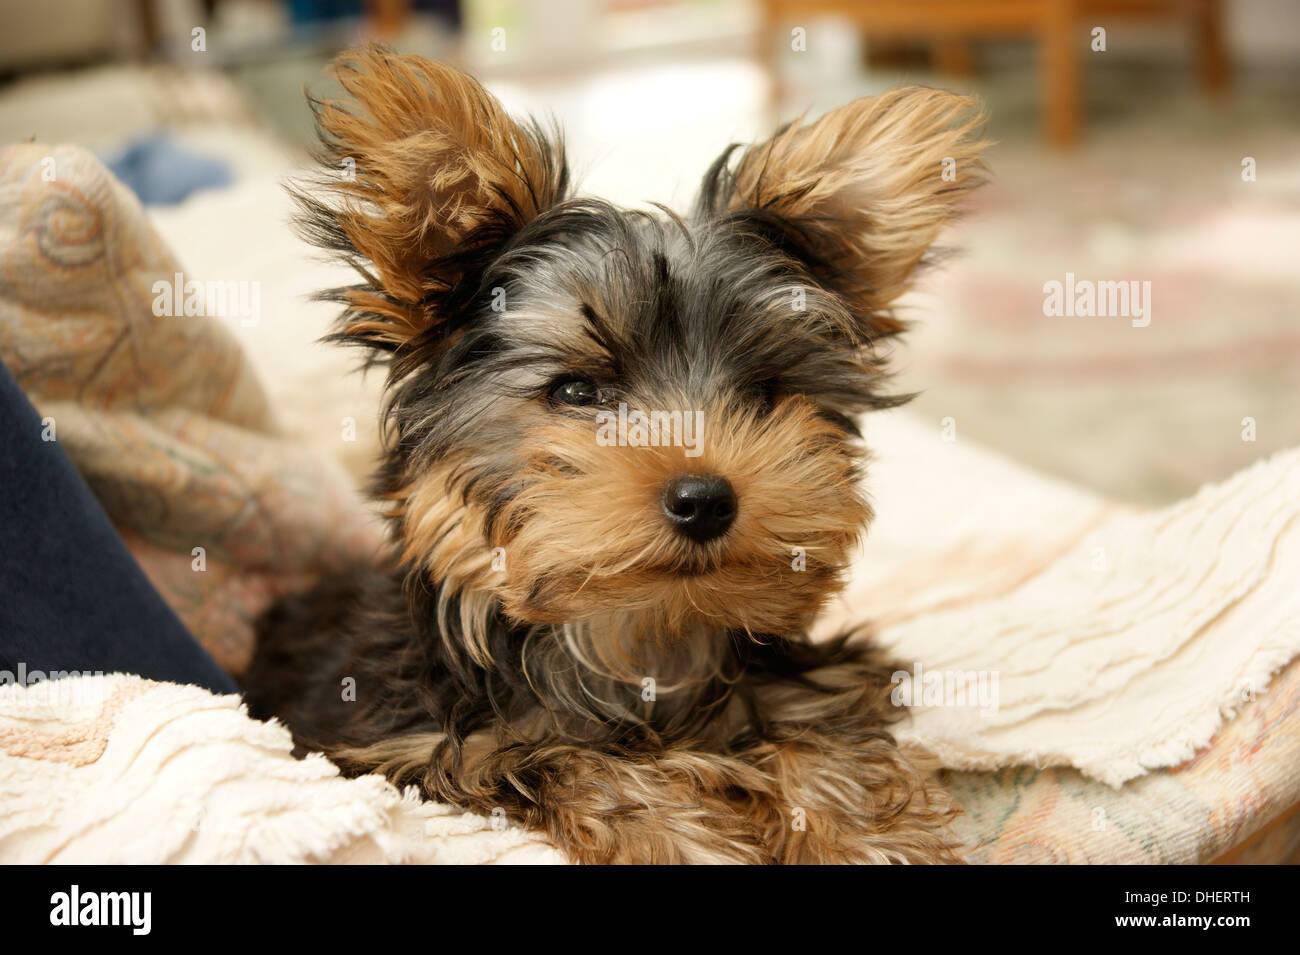 Cute Yorkshire terrier puppy dog Stock Photo